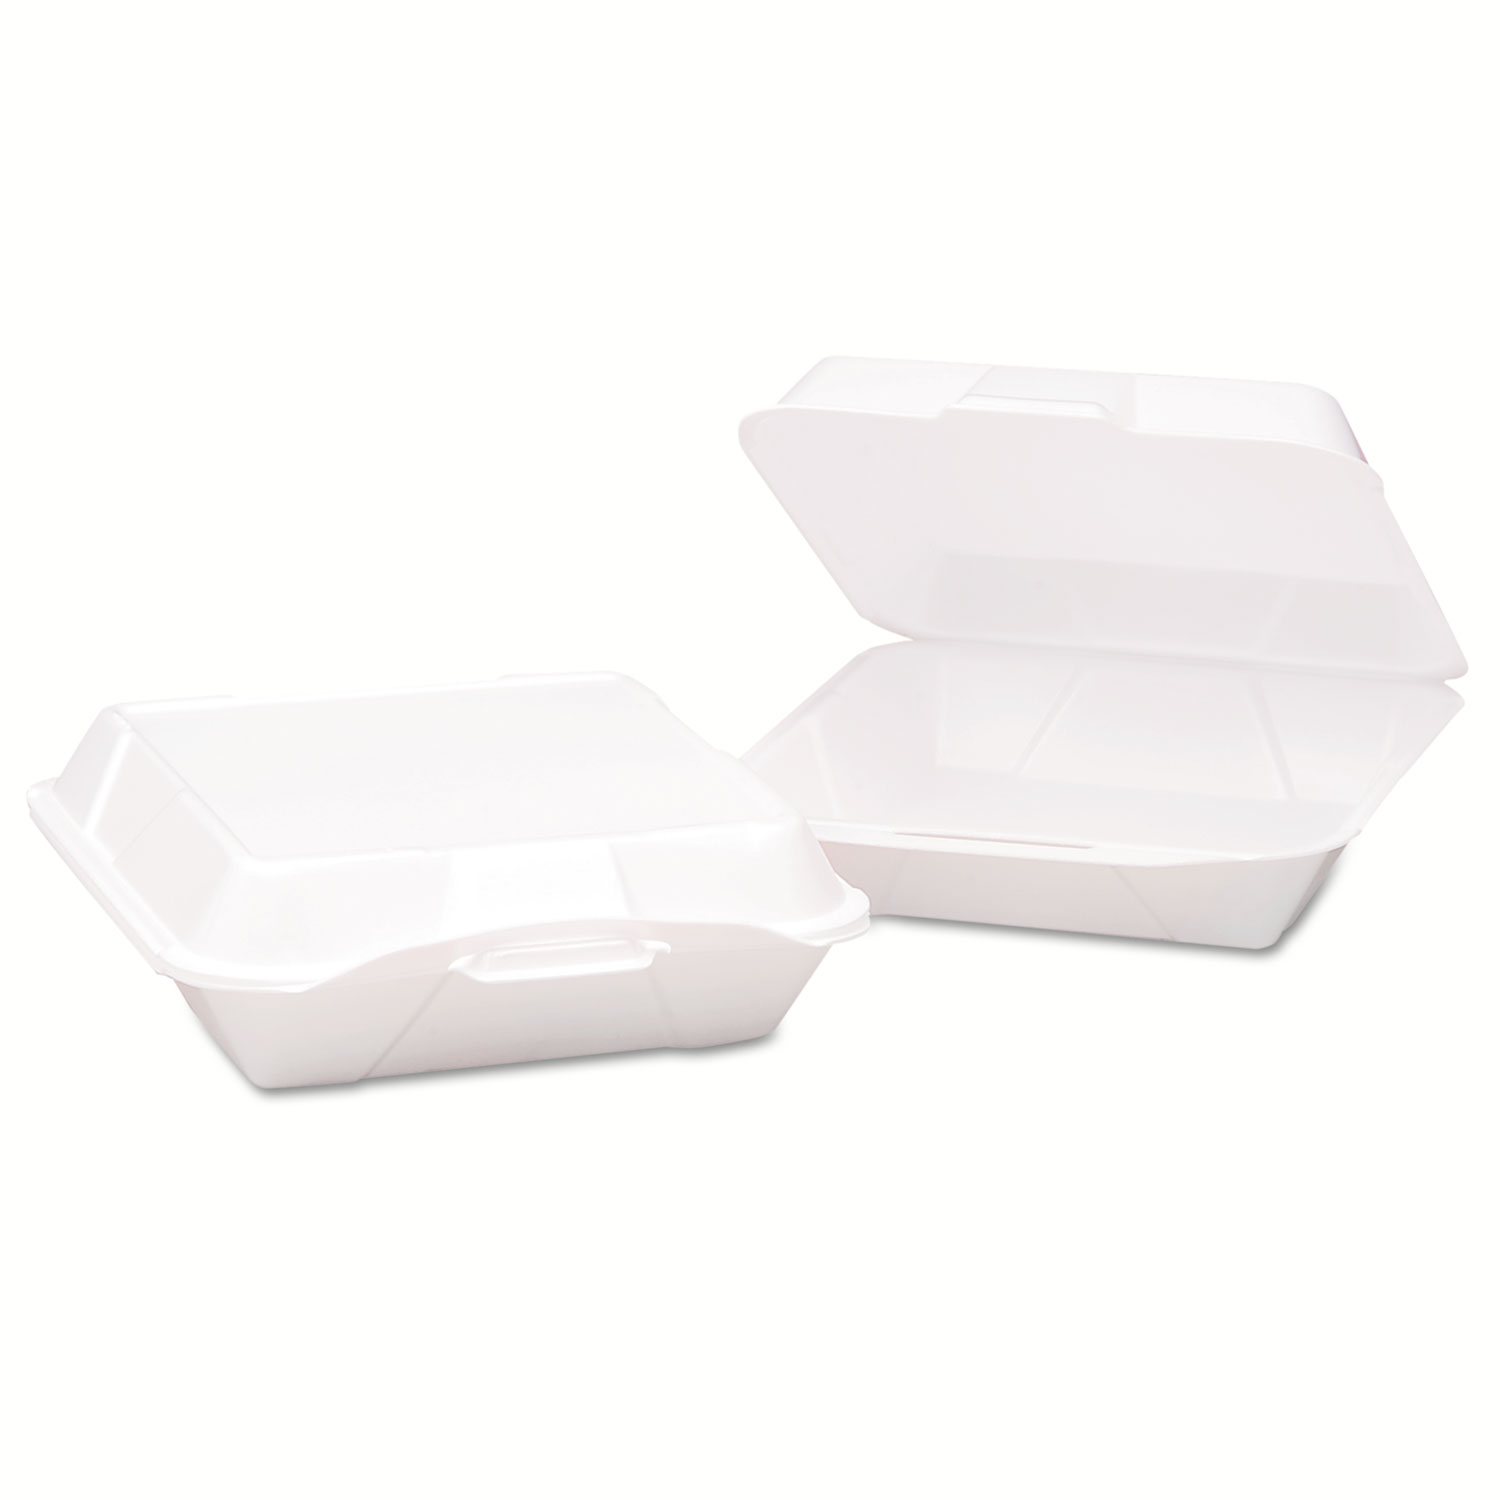  Genpak 20500-V-- Hinged-Lid Foam Carryout Containers, 9.19x6 1/2x3, White, Vented, 100/Bag, 2/CT (GNP20500V) 